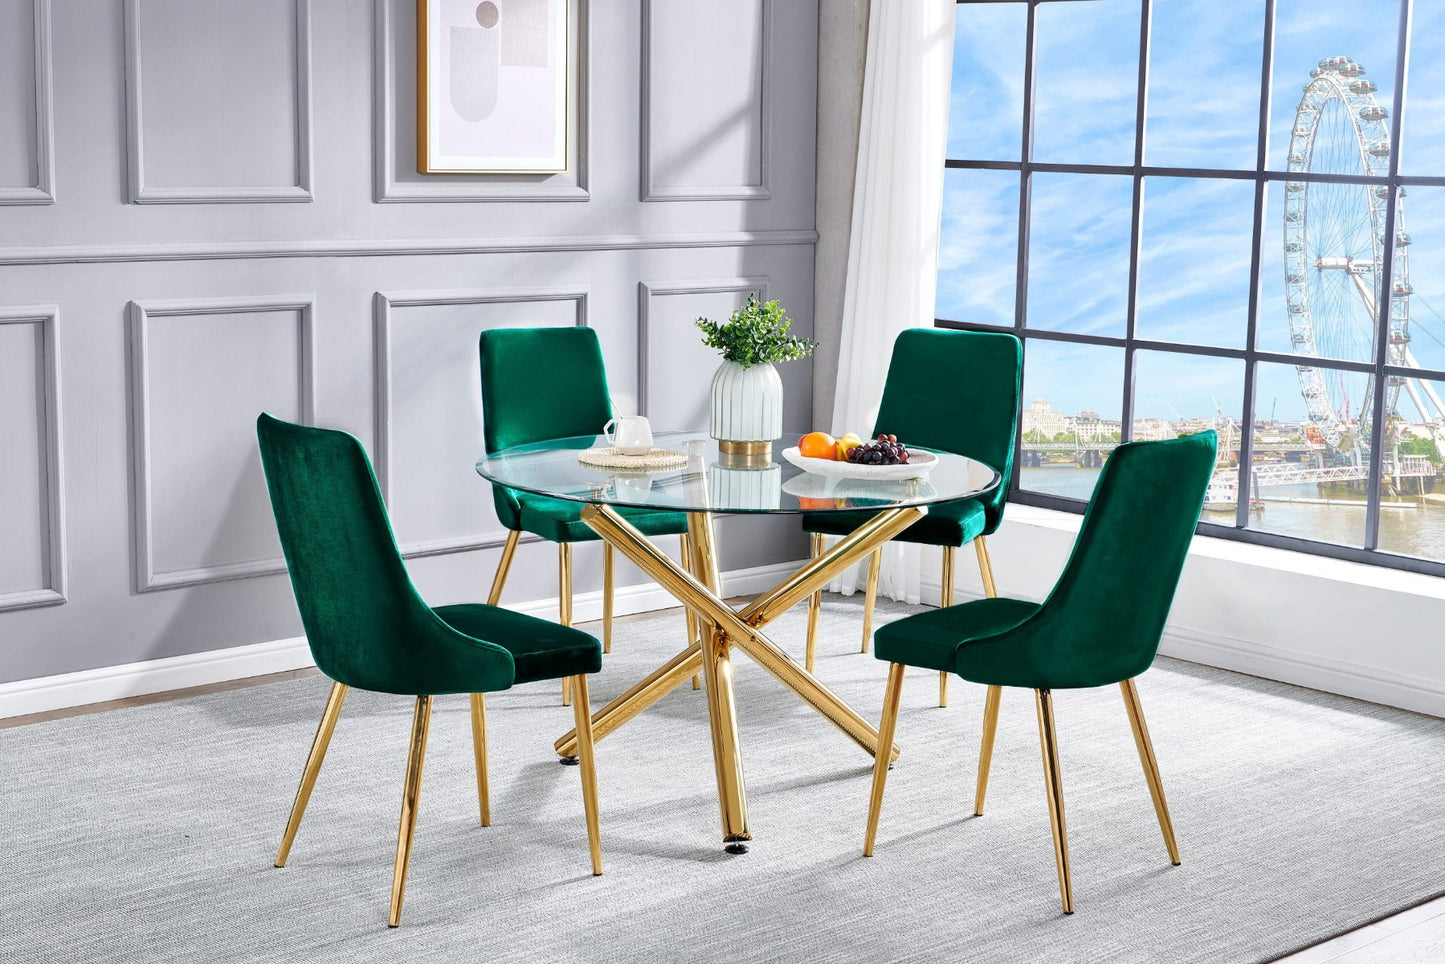 Classic 5 Pc Dining Set w/Uph Side Chair - 2 Chair Choices